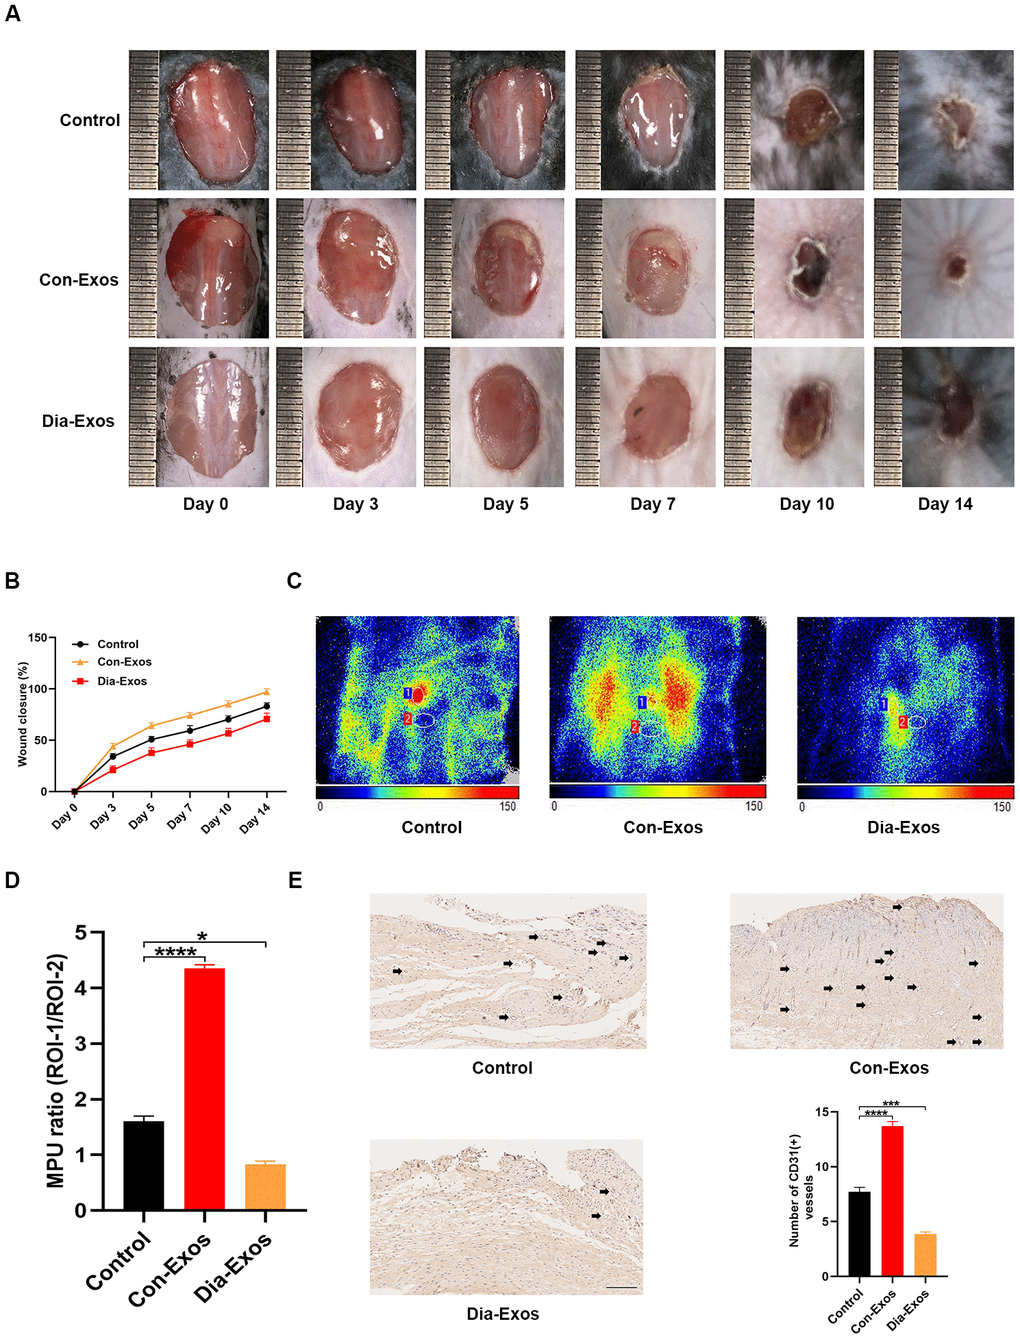 Dia-Exos hindered wound healing in vivo. (A) General view of wound closure after different treatments. Wounds are shown on days 0, 3, 5, 7, 10 and 14 post-wounding. (B) The wound closure rates of the three groups; n = 6 per group. (C, D) The MPU ratio at the wound area in each group was assessed through small animal doppler detection. The MPU ratio is the MPU of the wound area (region of interest 1) divided by the MPU of the area around the wound (region of interest 2). n = 6 per group. (E) Immunohistochemical analysis of CD31 in the wound site after different treatments. The number of CD31-positive cells was quantified in five random fields of view. Vessels with diameters of 2-10 μm were counted as individual vessels. n = 6 per group; scale bar: 100 μm. Data are the means ± SDs of three independent experiments. *p 